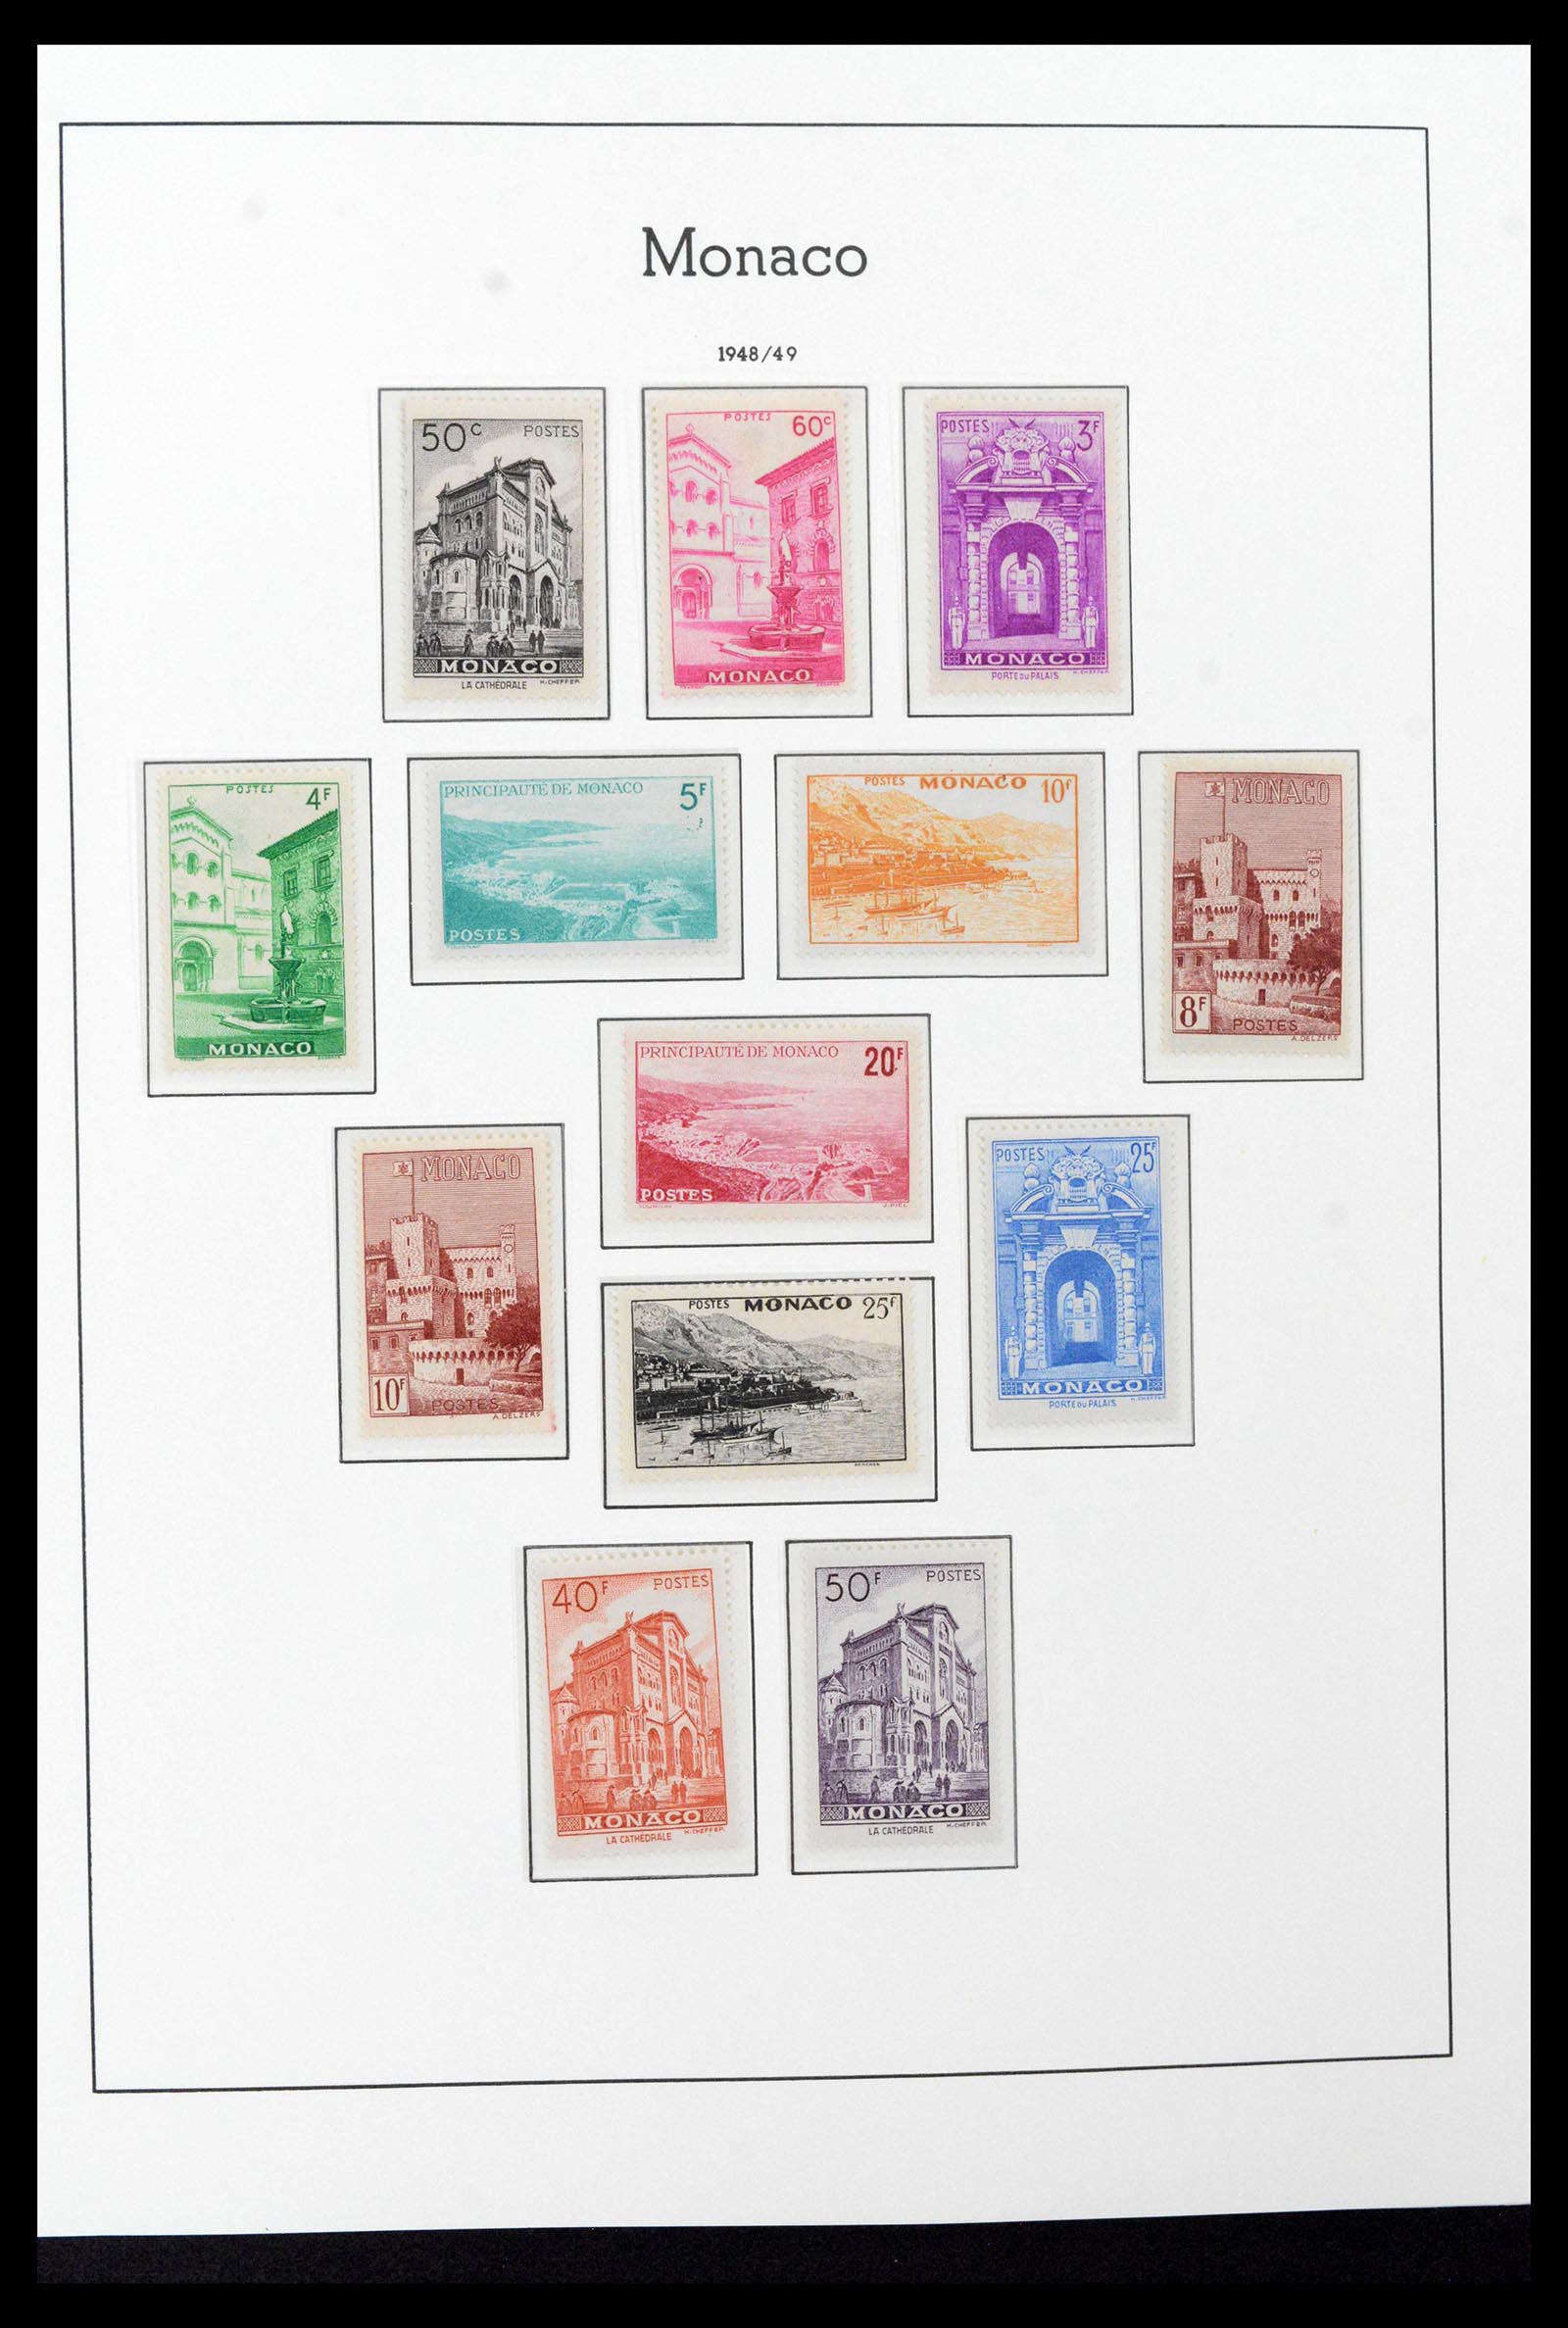 39390 0038 - Stamp collection 39390 Monaco complete 1885-1990.